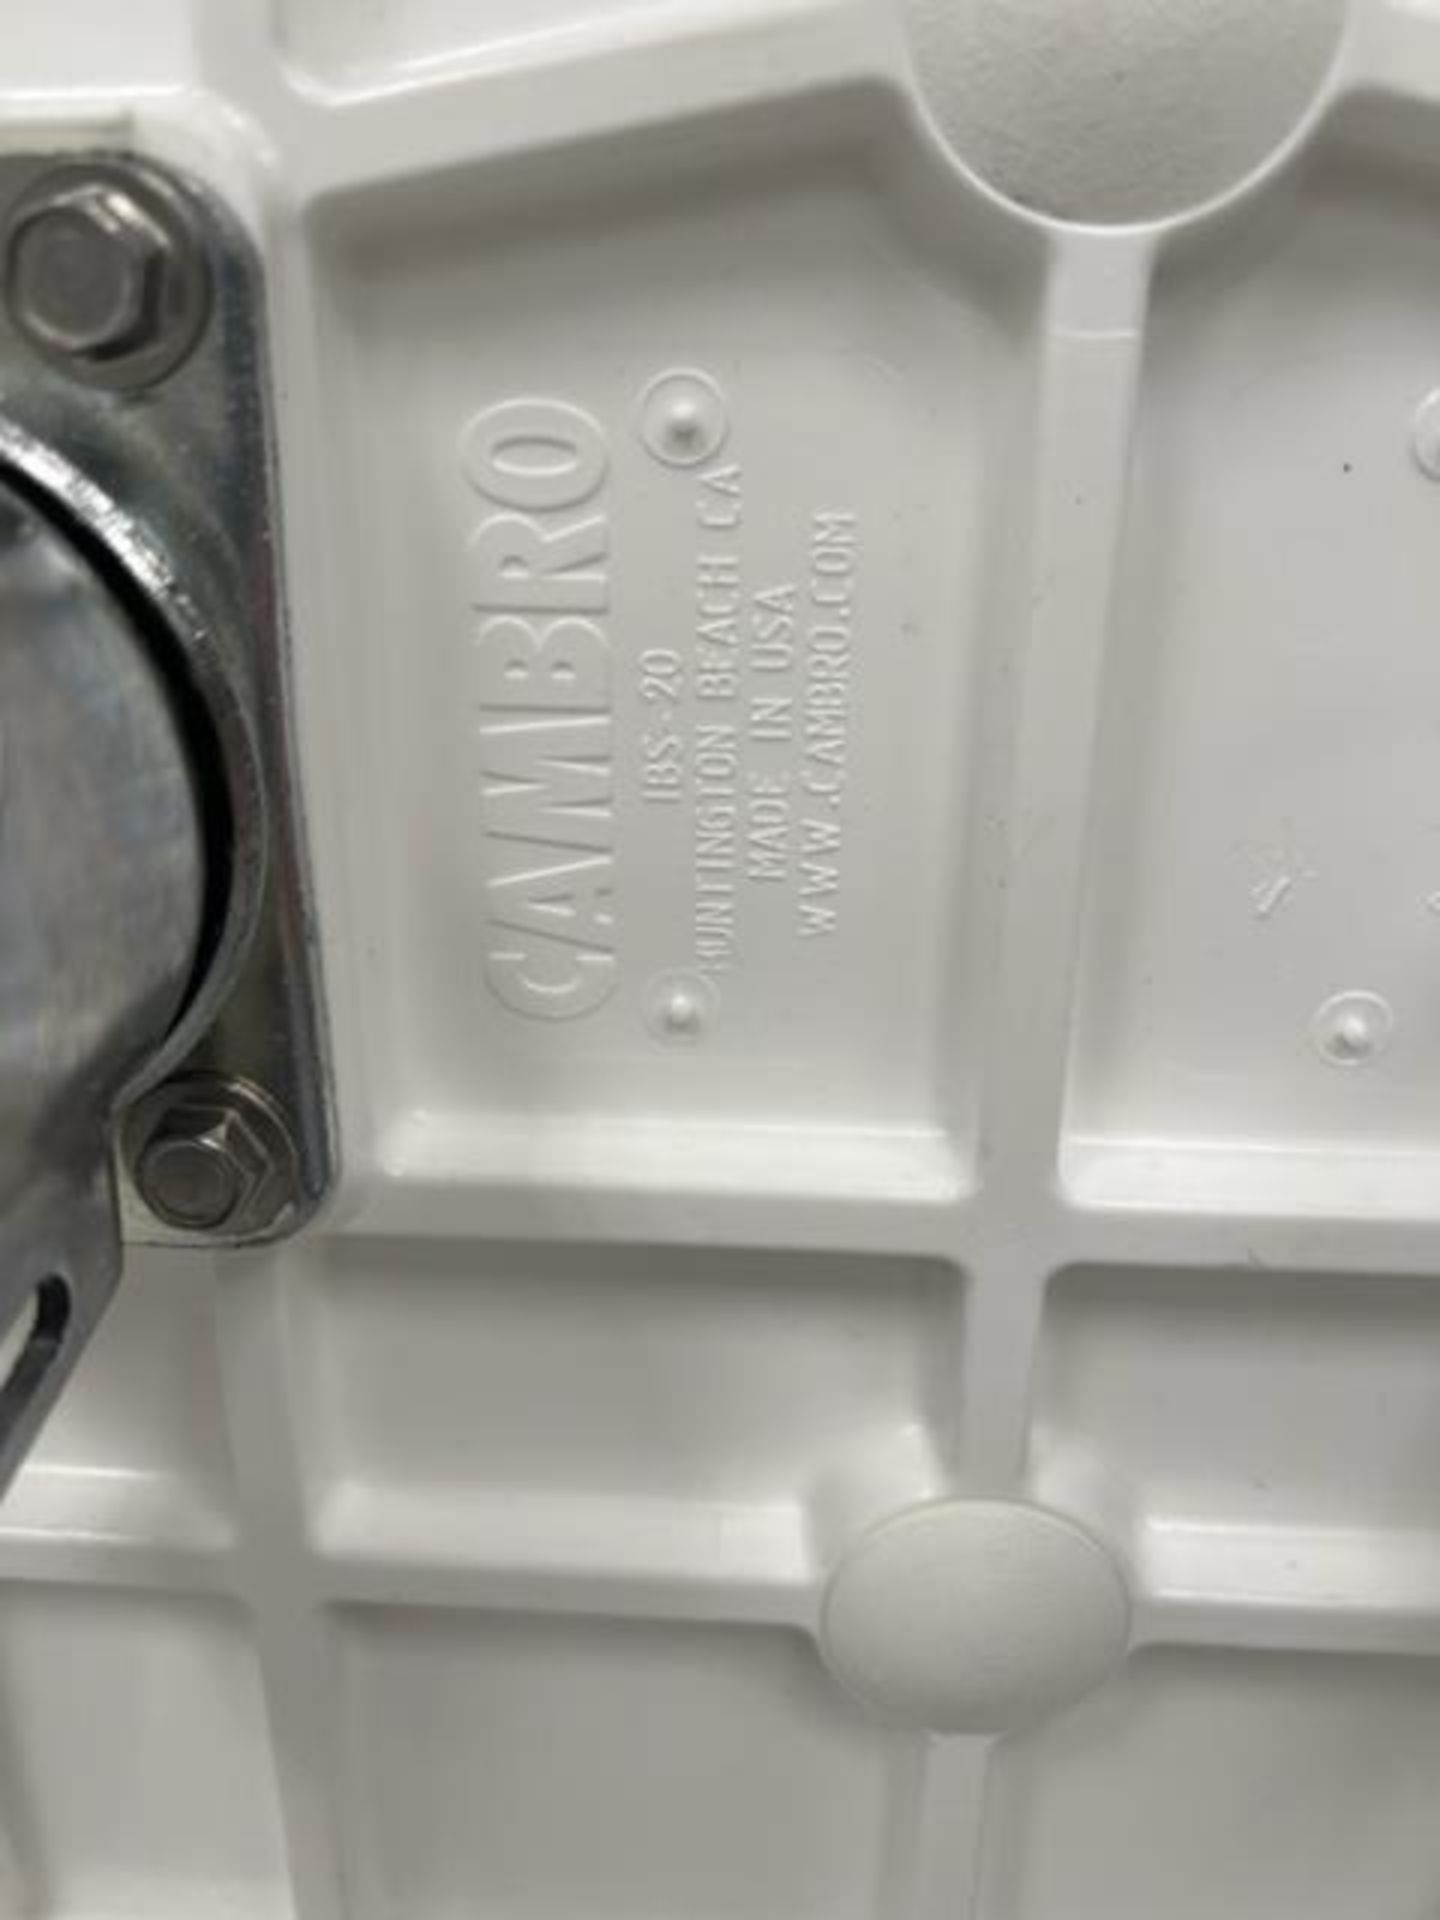 (Located in: Denver, CO) Cambro IBS-20 - 21 Gallon/ 335 Cup - Used - Qty. 2 - Image 2 of 2